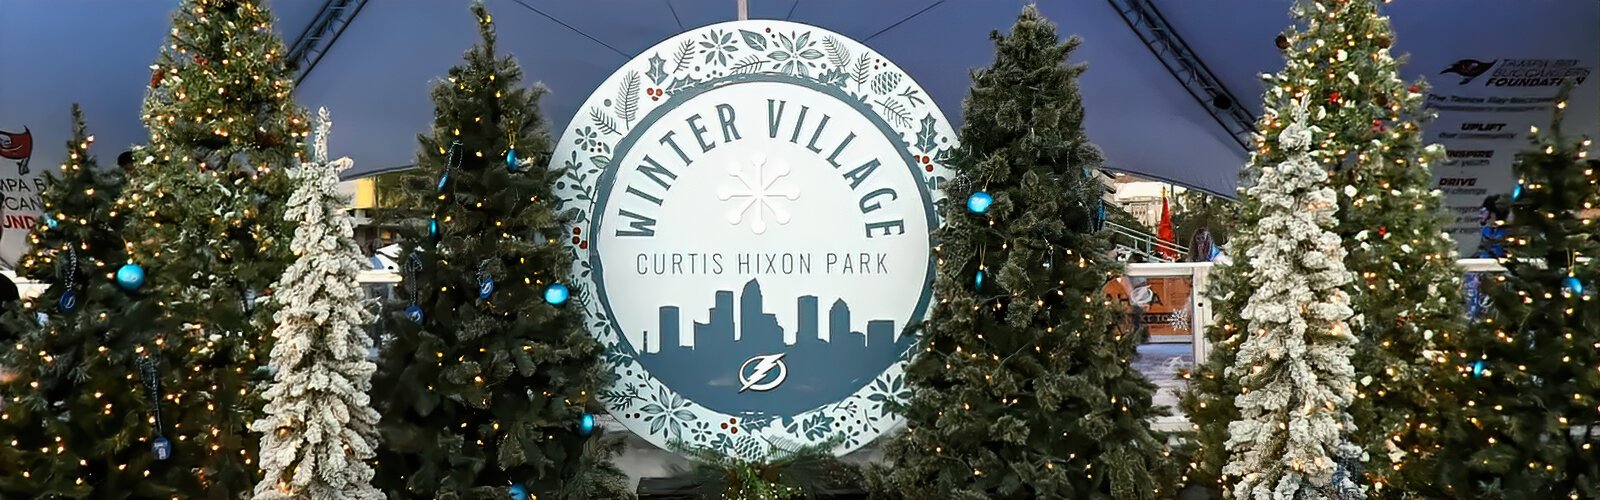 Sponsored by the Tampa Bay Lightning, the Tampa Downtown Partnership's popular Winter Village will celebrate the holiday season through January 04, 2023 at Curtis Hixon Waterfront Park.